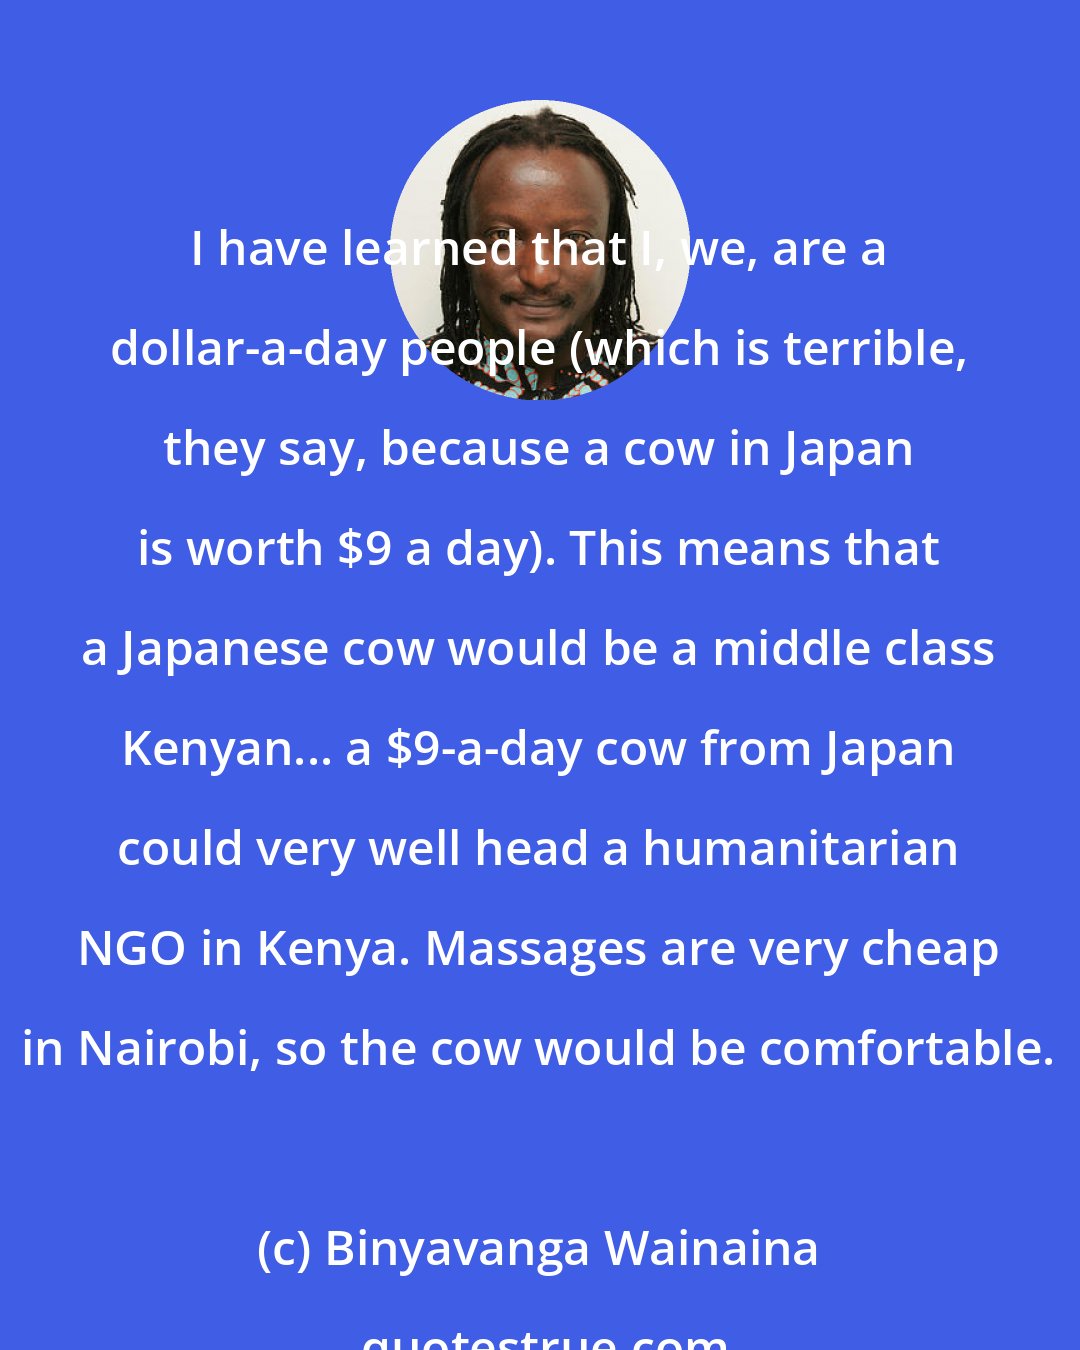 Binyavanga Wainaina: I have learned that I, we, are a dollar-a-day people (which is terrible, they say, because a cow in Japan is worth $9 a day). This means that a Japanese cow would be a middle class Kenyan... a $9-a-day cow from Japan could very well head a humanitarian NGO in Kenya. Massages are very cheap in Nairobi, so the cow would be comfortable.